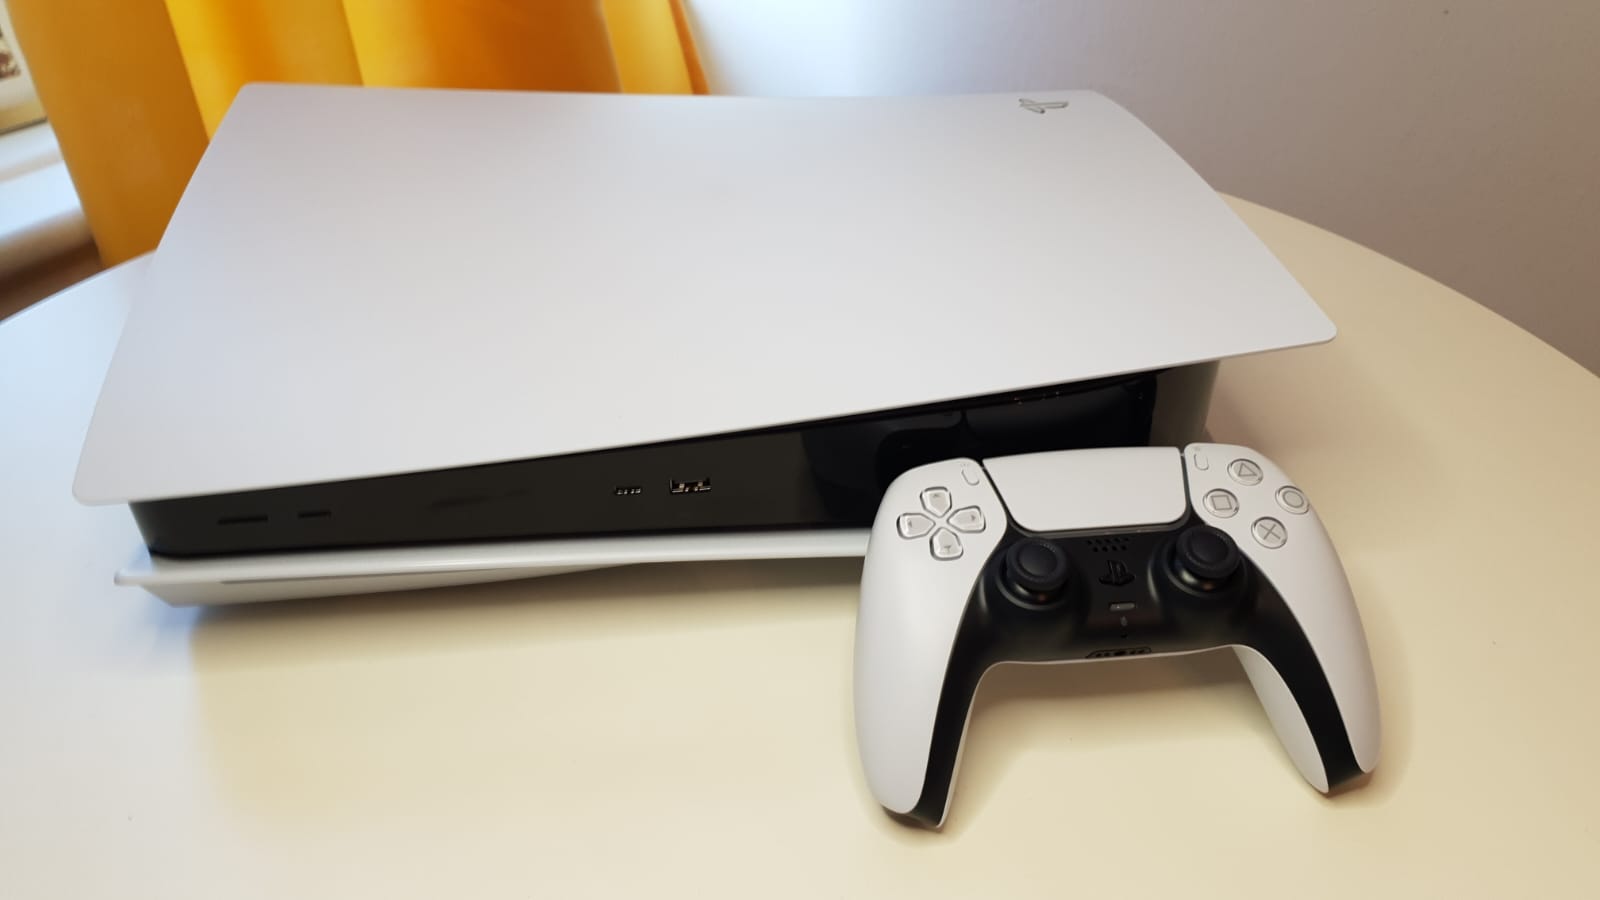 PS5 Slim release date could be announced soon after recent sale and